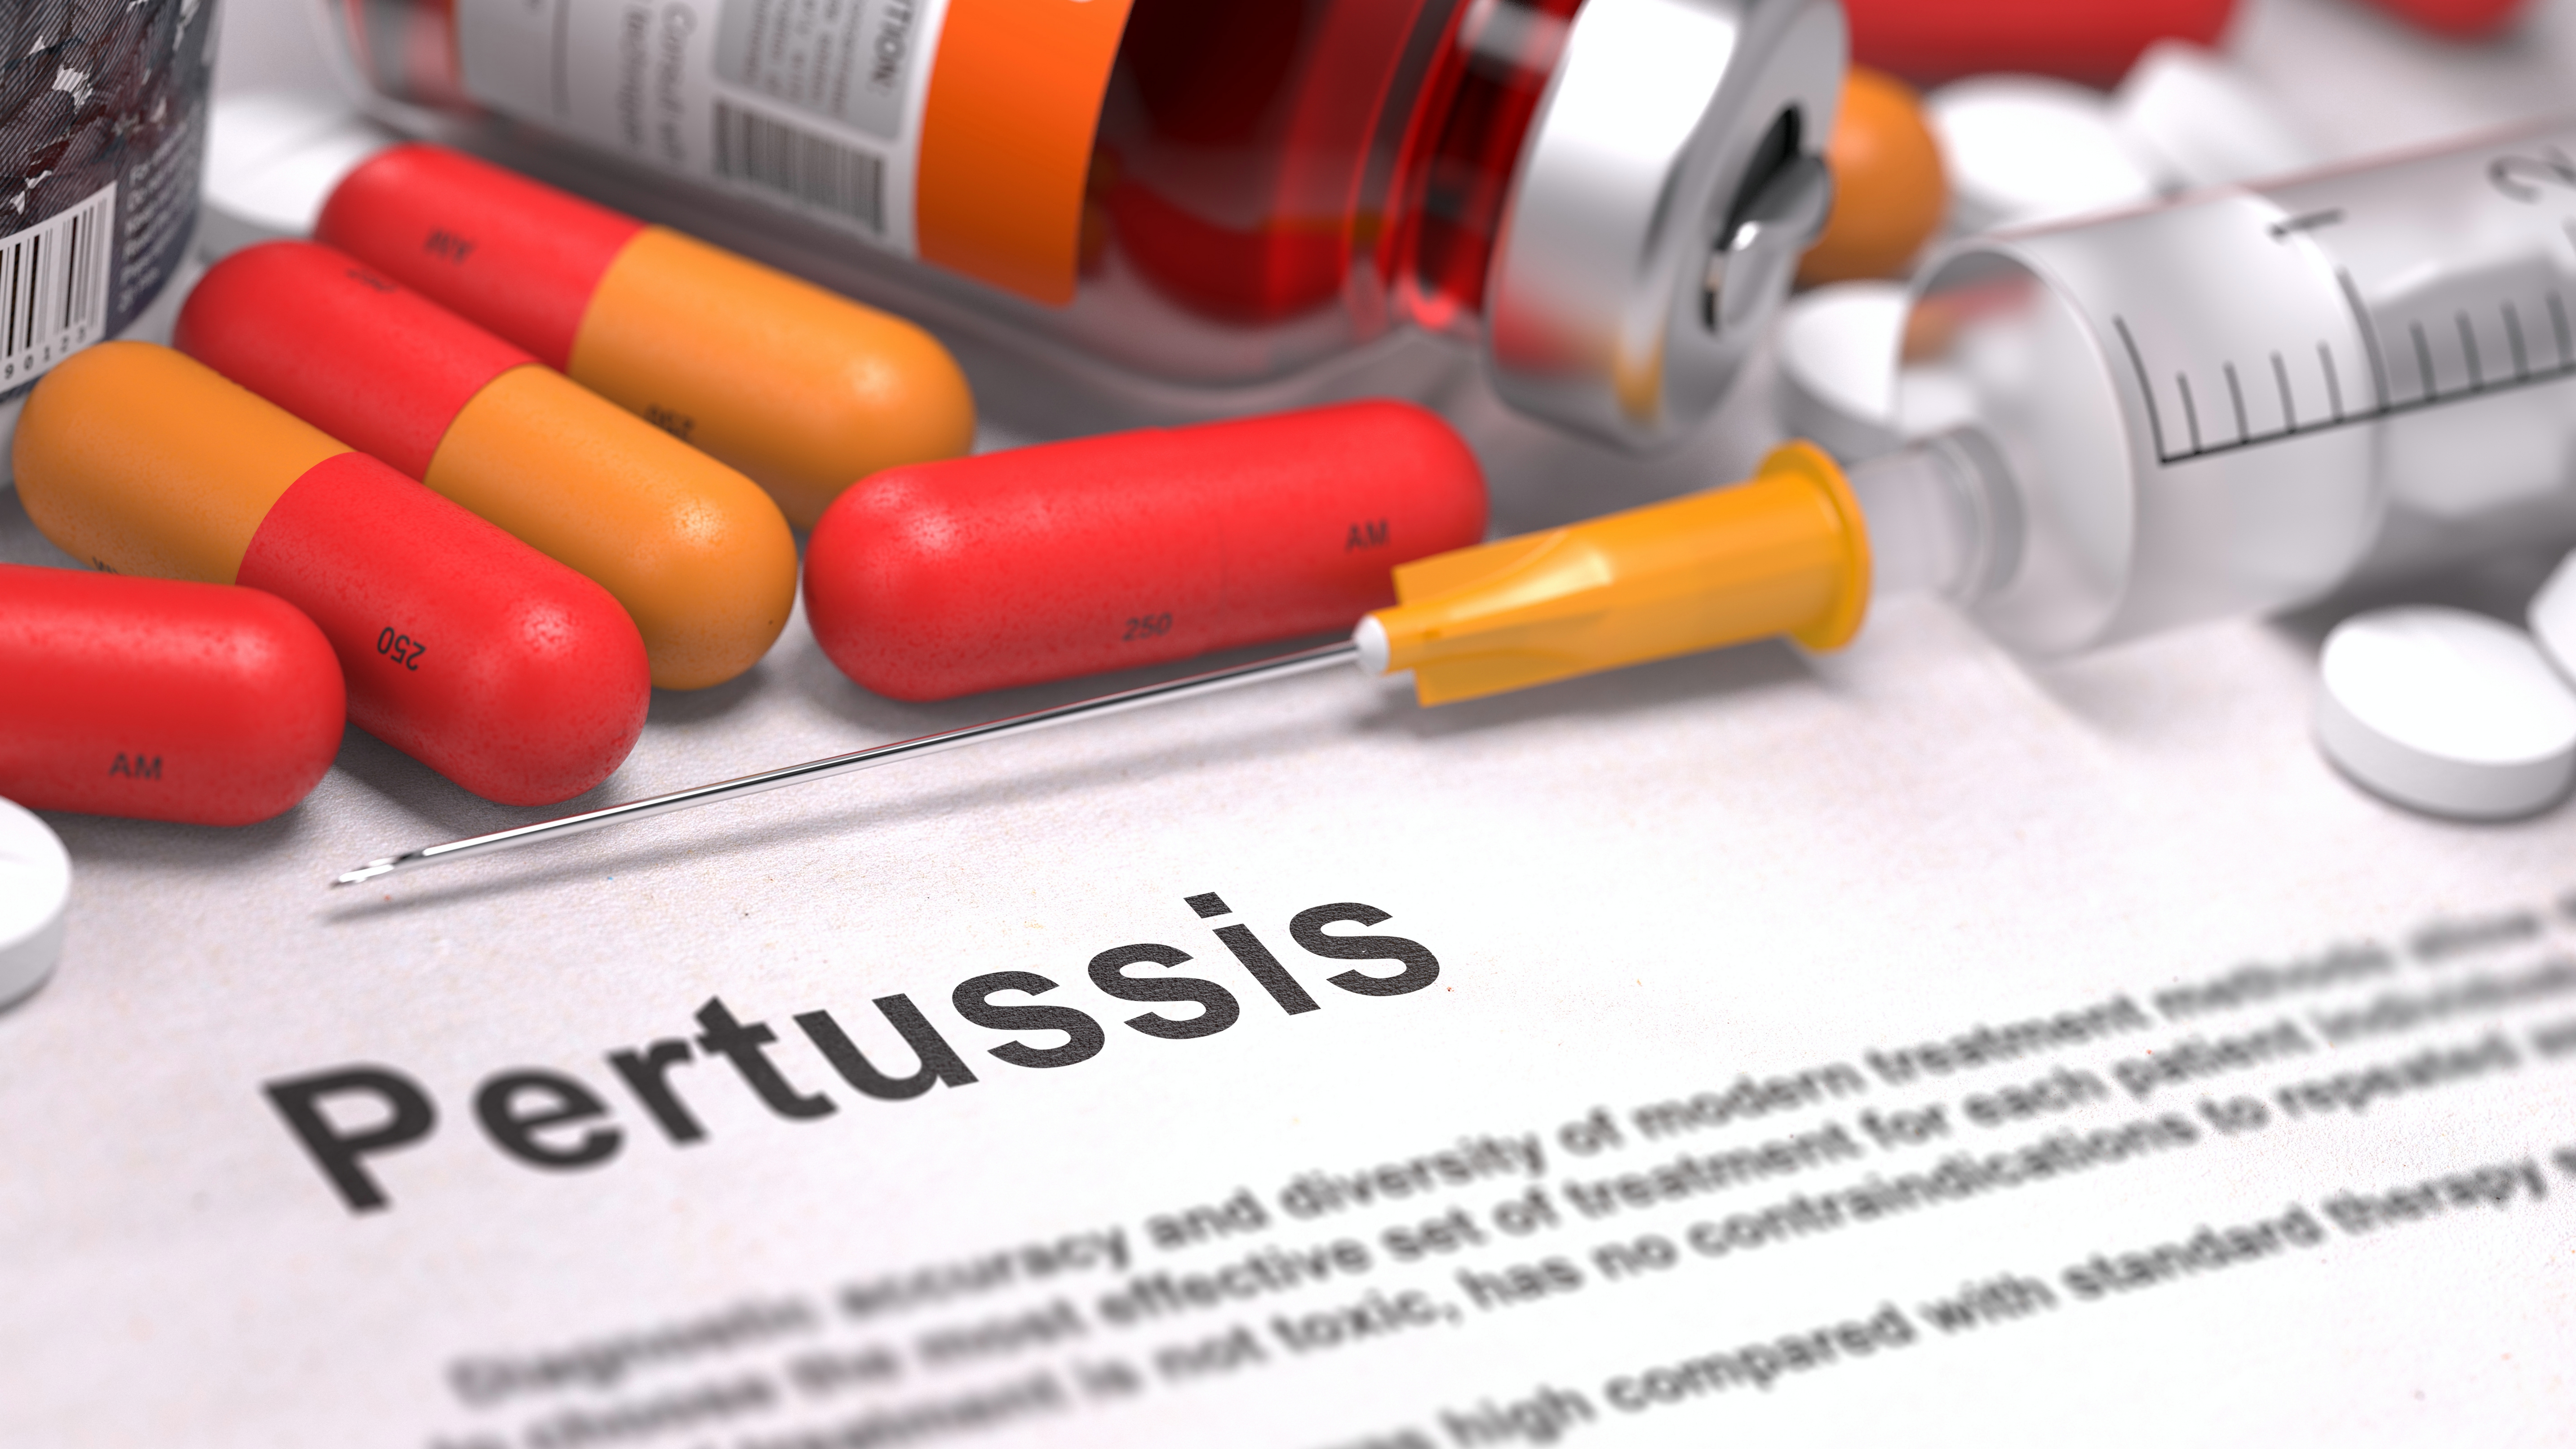 Pertussis - Printed Diagnosis with Red Pills, Injections and Syringe. 